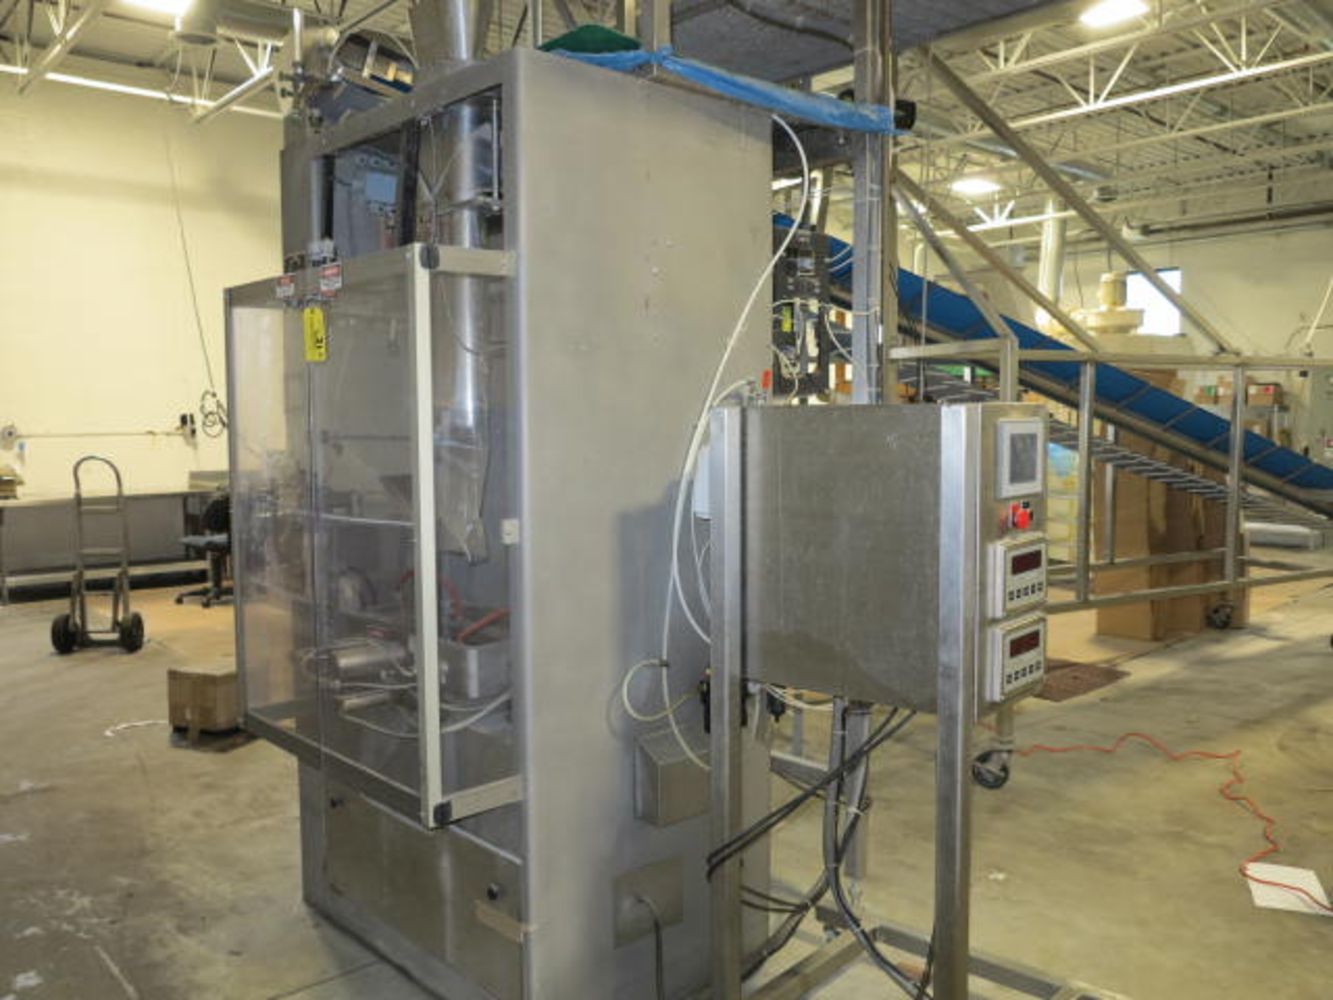 Cheese Packing Facility- 90WCS Bagging Machine w/Scales; Urschel CC-D Shredders, Fitzpatrick Dryers, Fitz Mill Guilo River Equipment and more!